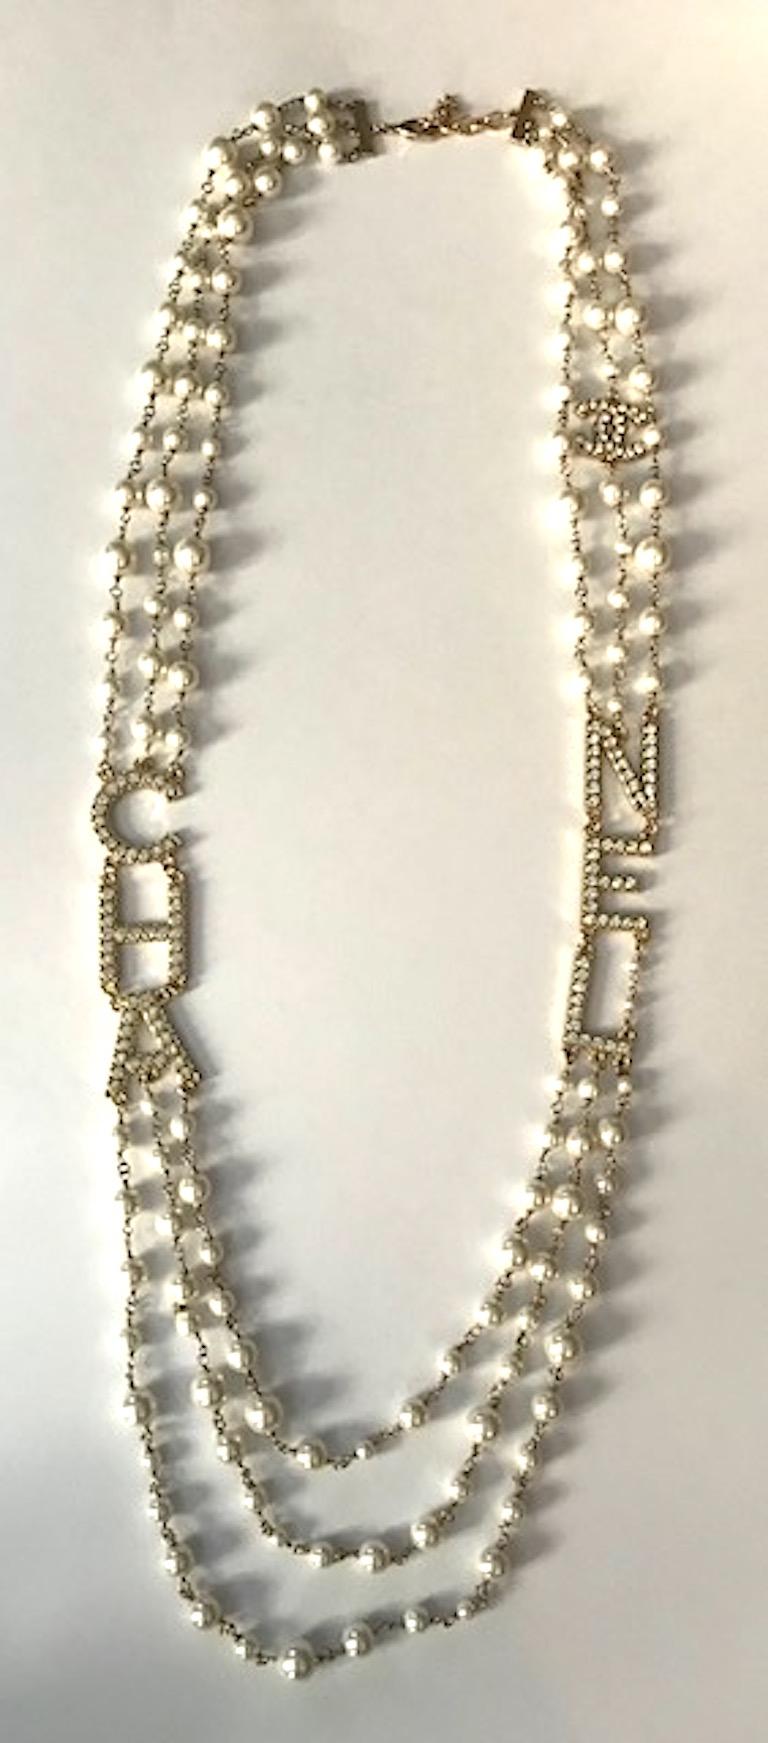 Chanel 3 Strand Pearl & C H A and N E L Letter Necklace, 2018 Collection 9